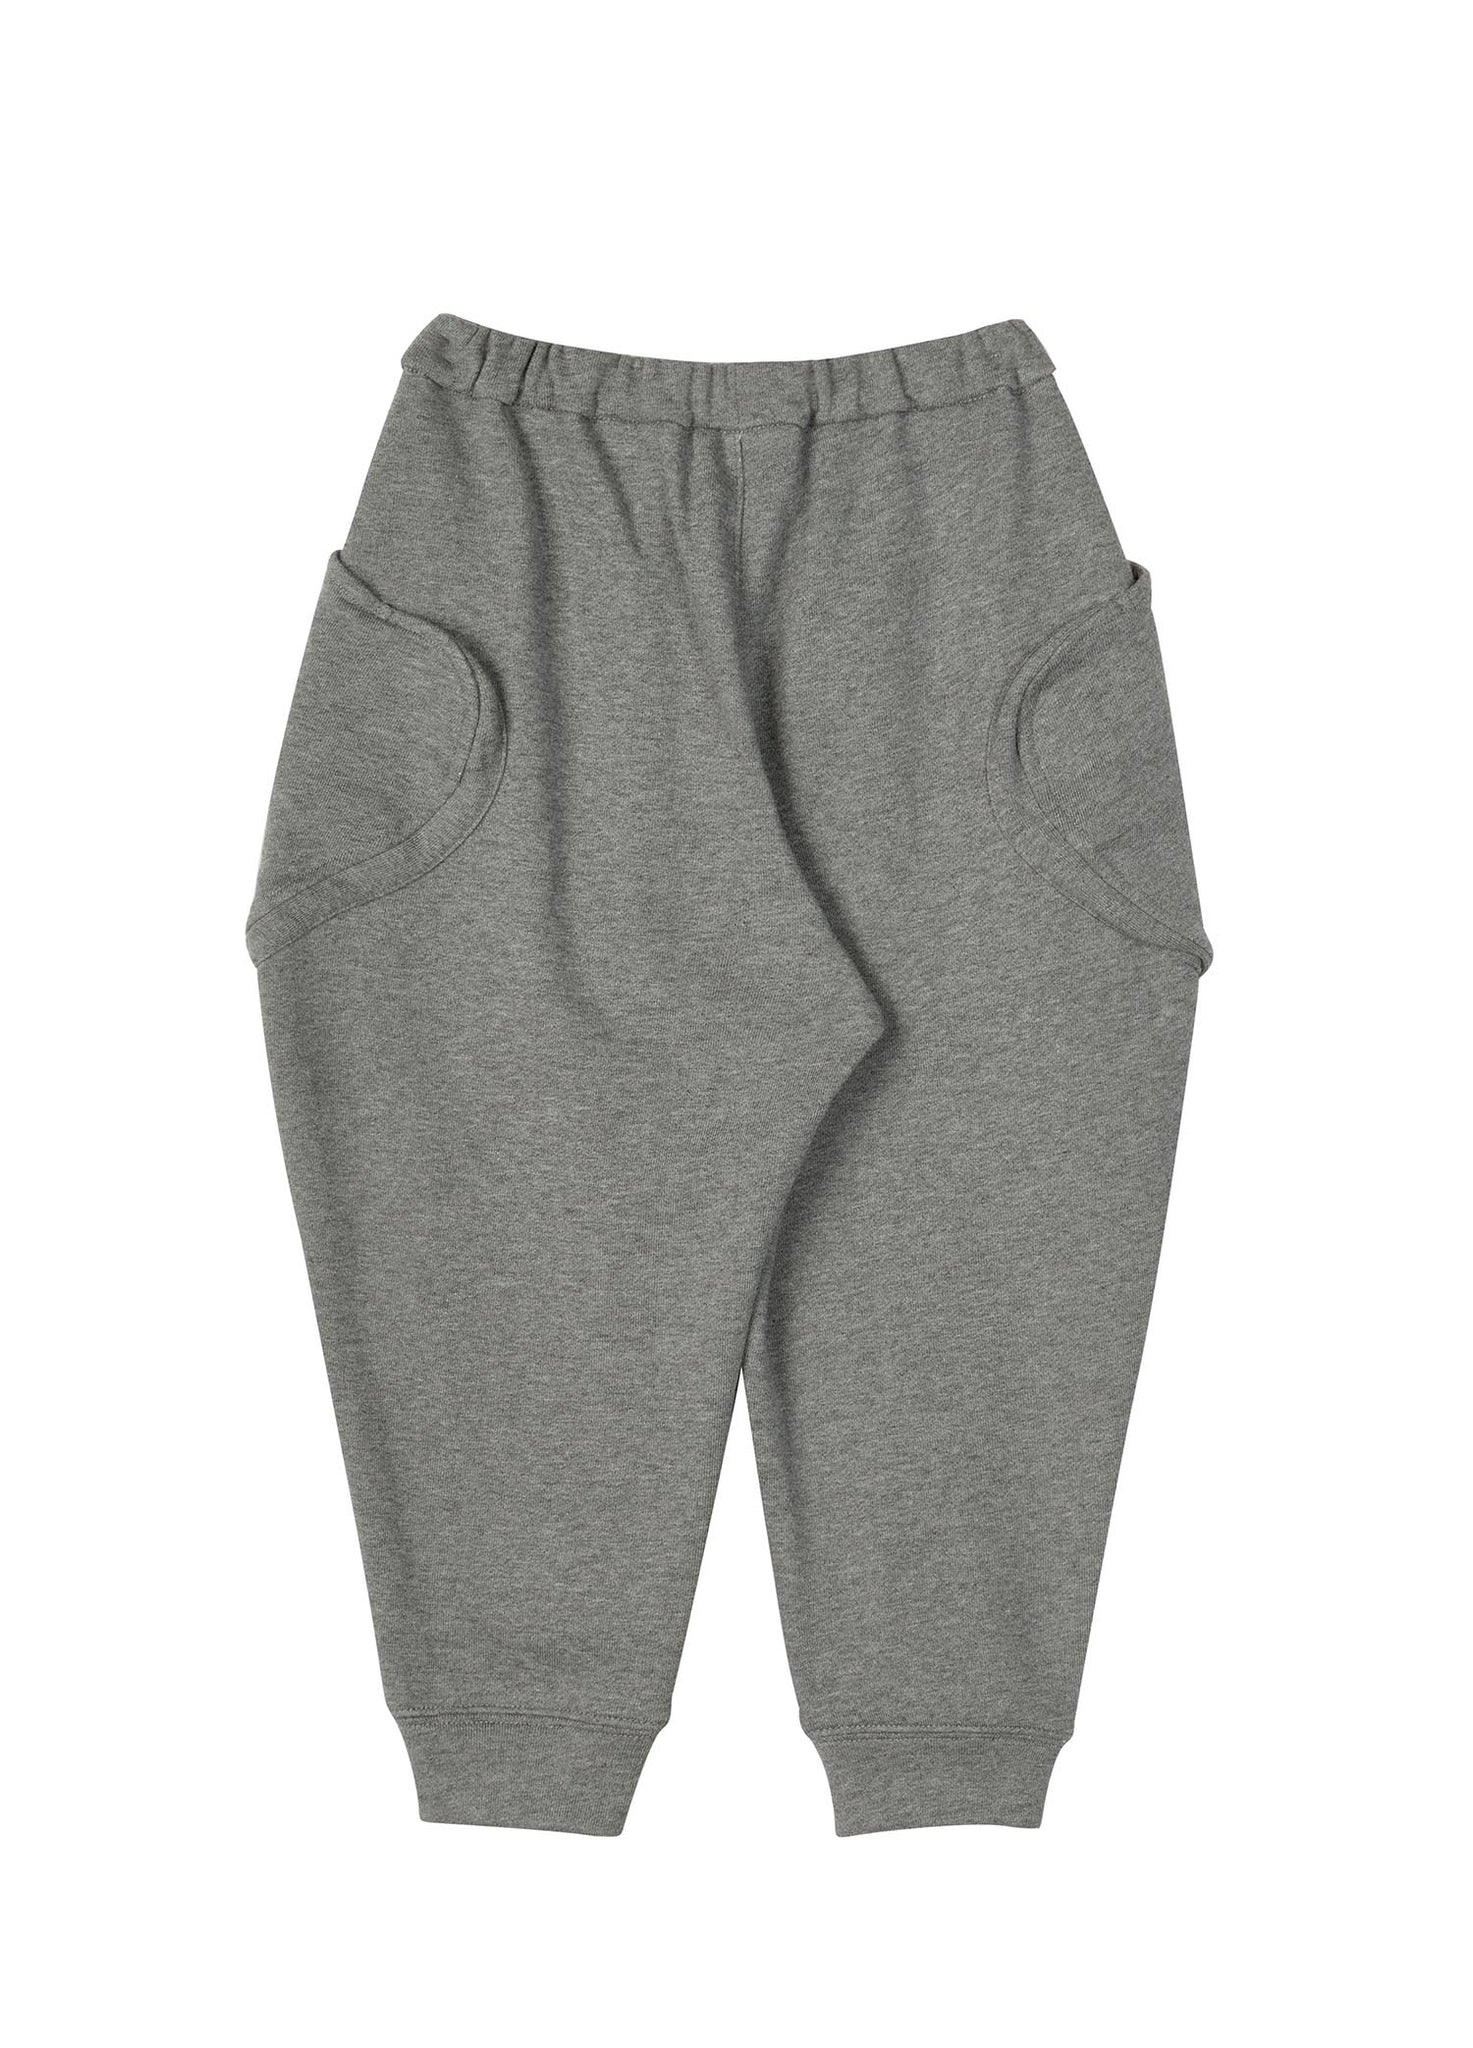 Pants / jnby by JNBY Cropped Pants for Kids